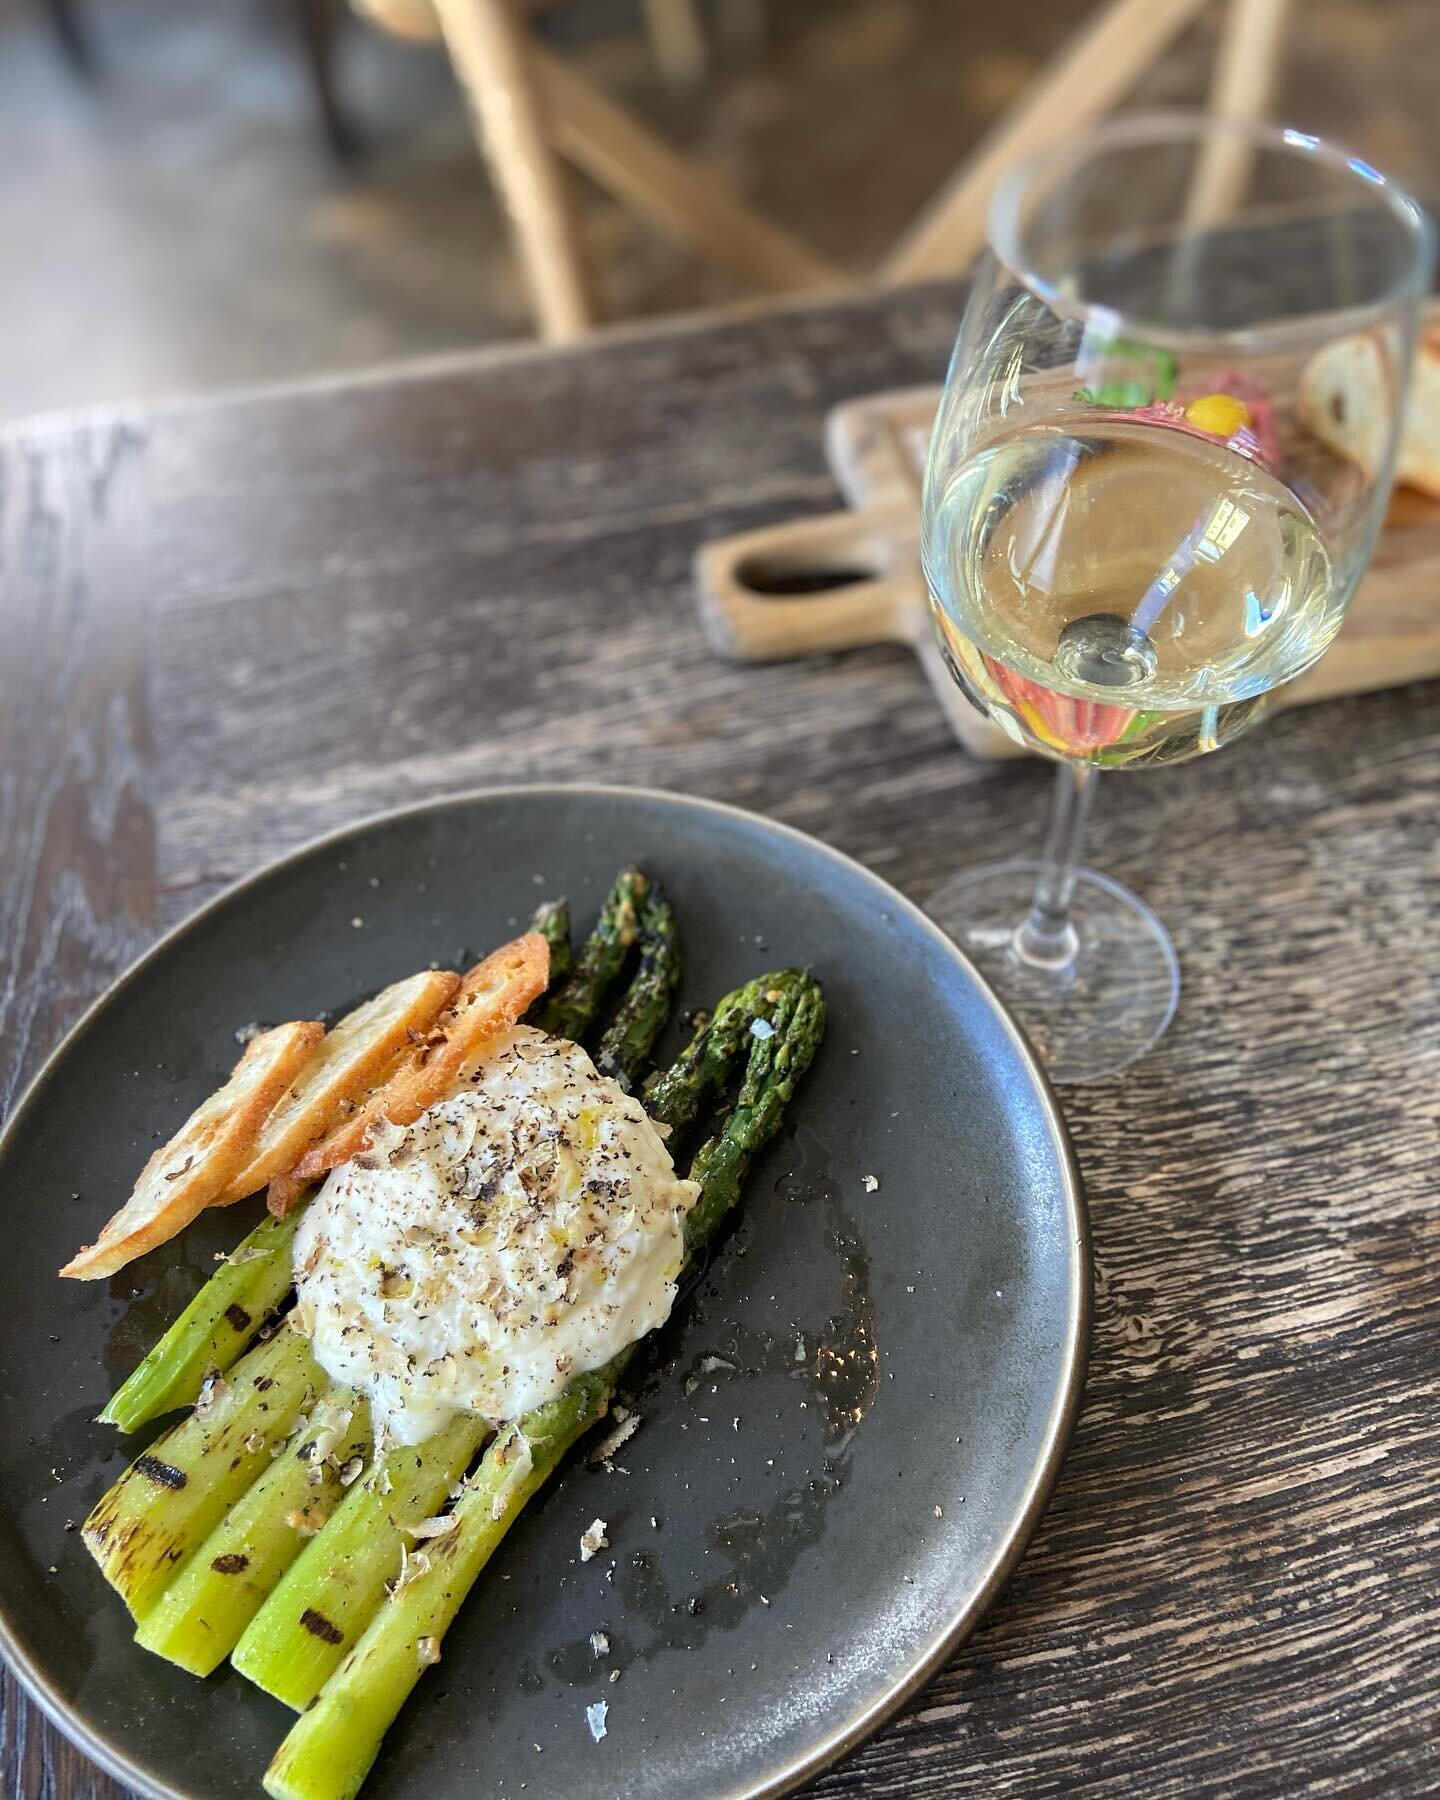 Minus 5 to our favorite season 🫛. Expect some goodies to show up on our menu. Asparagus, peas, fava (and Pecorino.) We can&rsquo;t wait to celebrate spring time with you!

#sfrestaurants #54mintsf #springequinox #springtime #eeeeats #bayareafoodie #